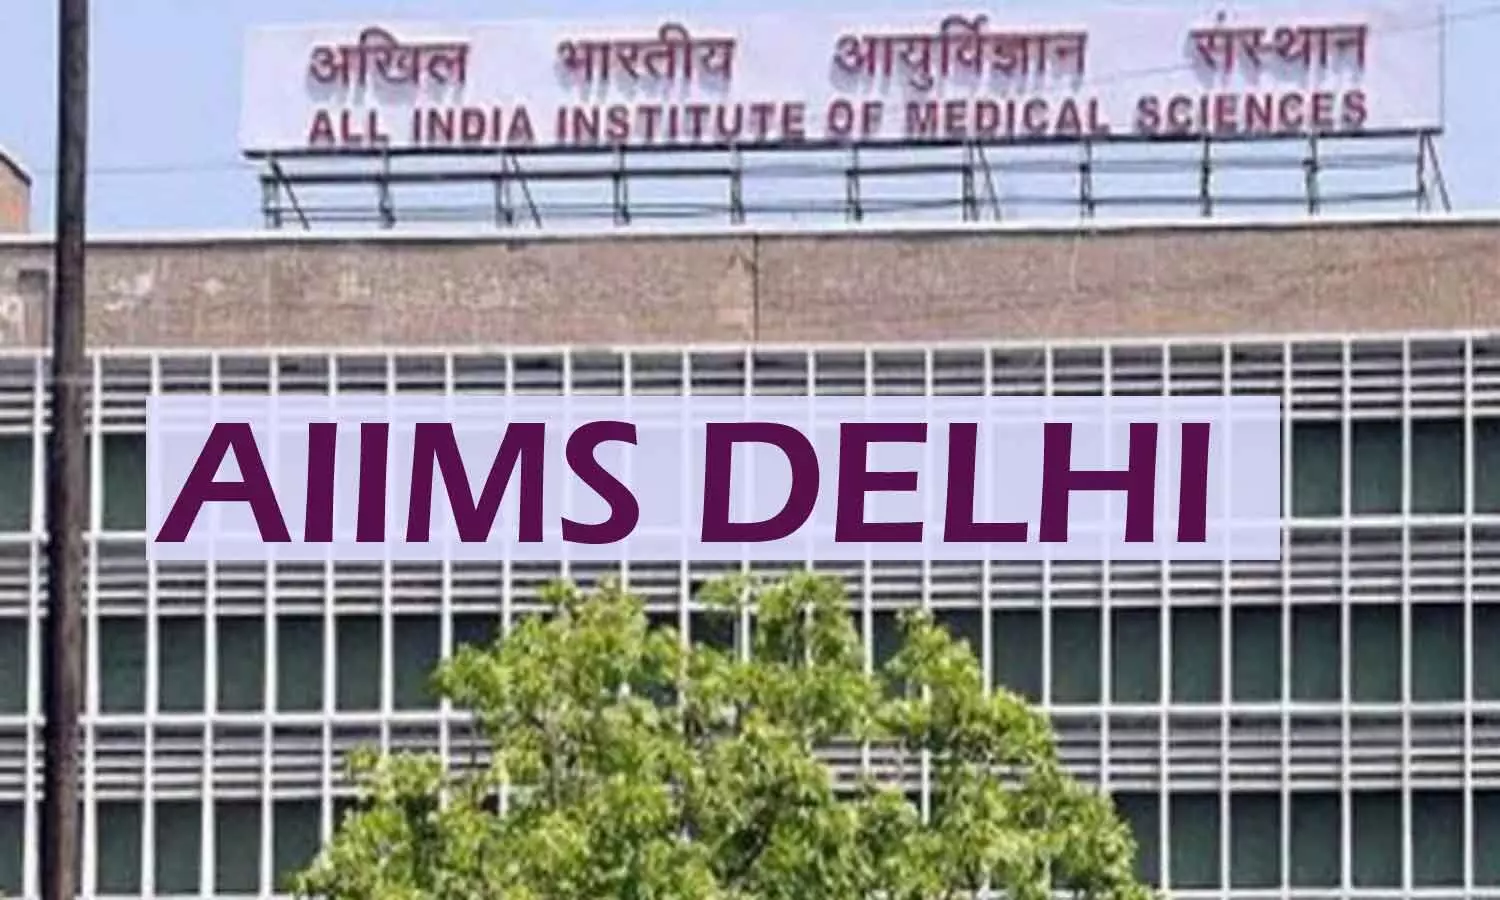 AIIMS Resident Doctors support IMA protest against Govts medical reforms, policy decisions